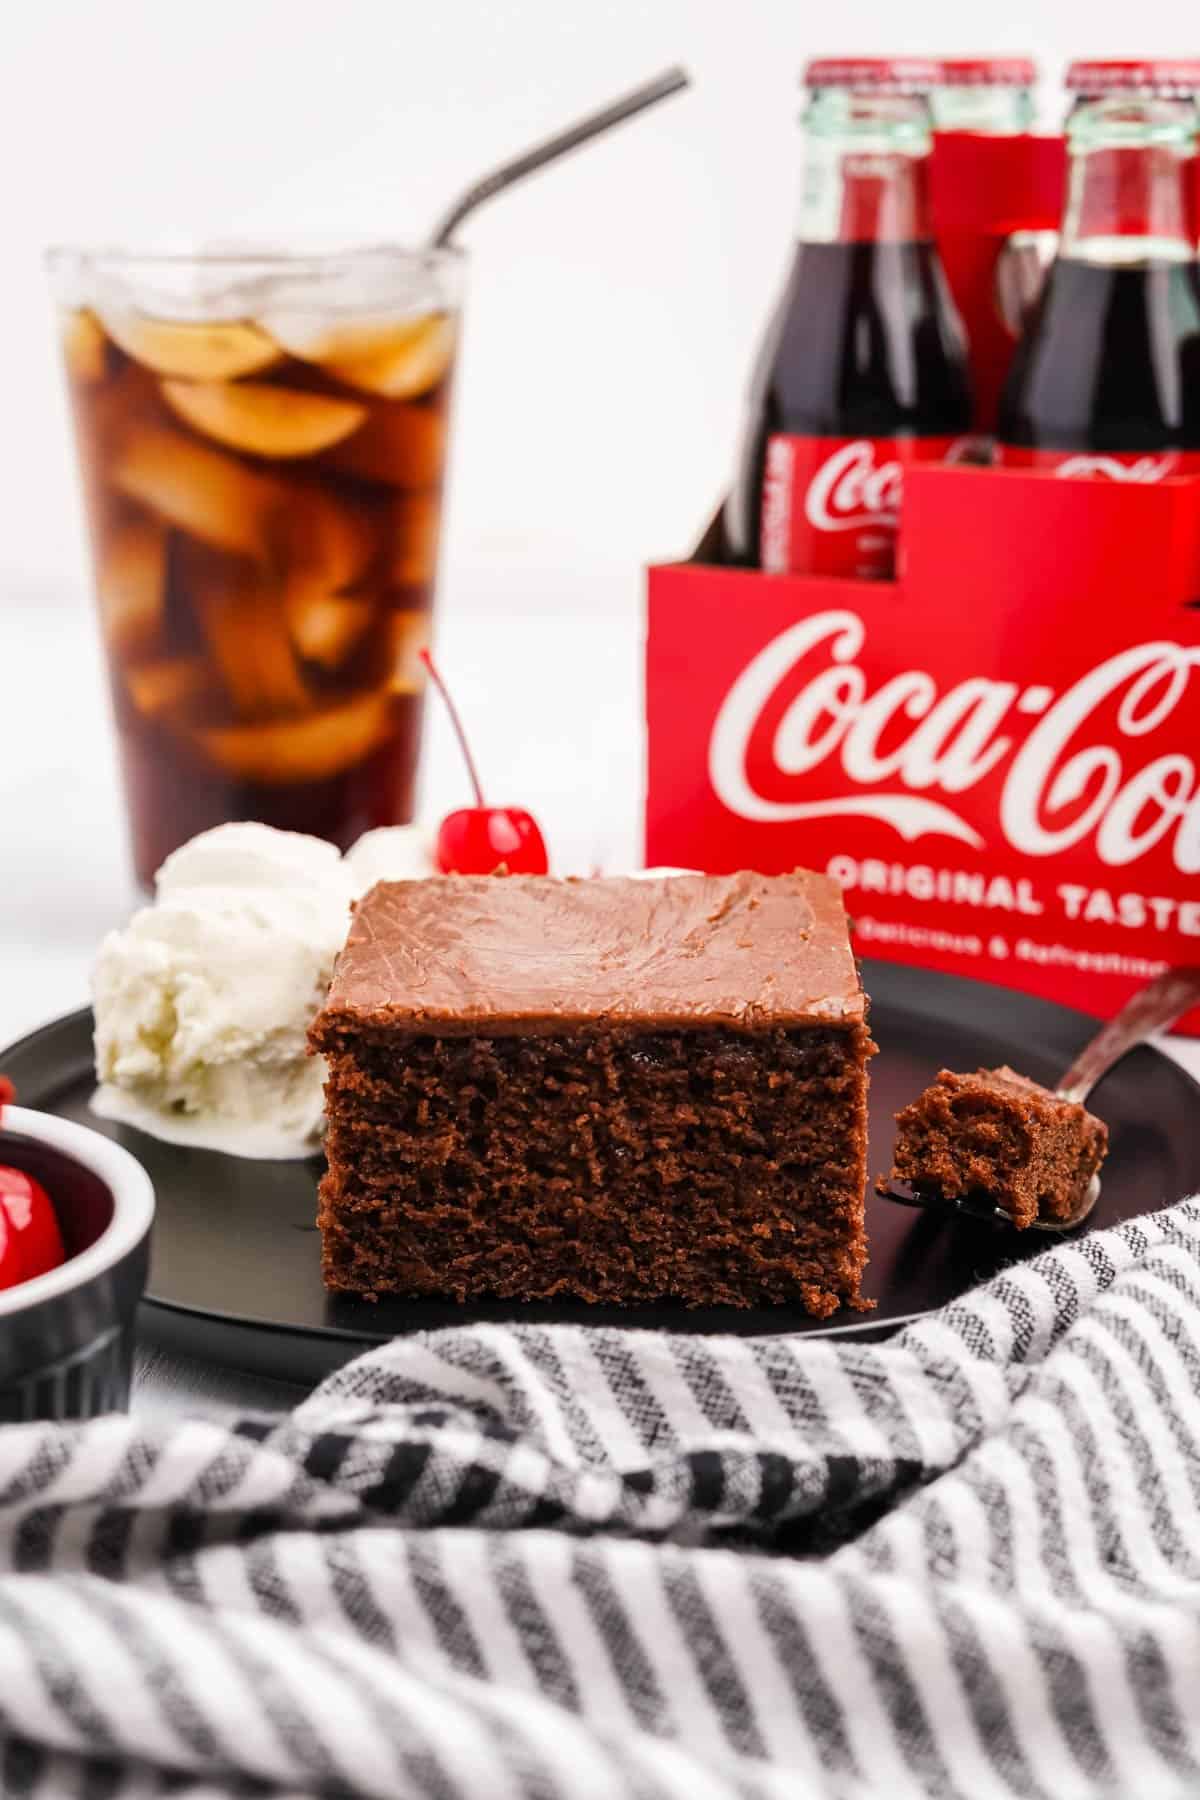 A piece of chocolate coca cola cake in front of a glass of coke and more bottles of soda.